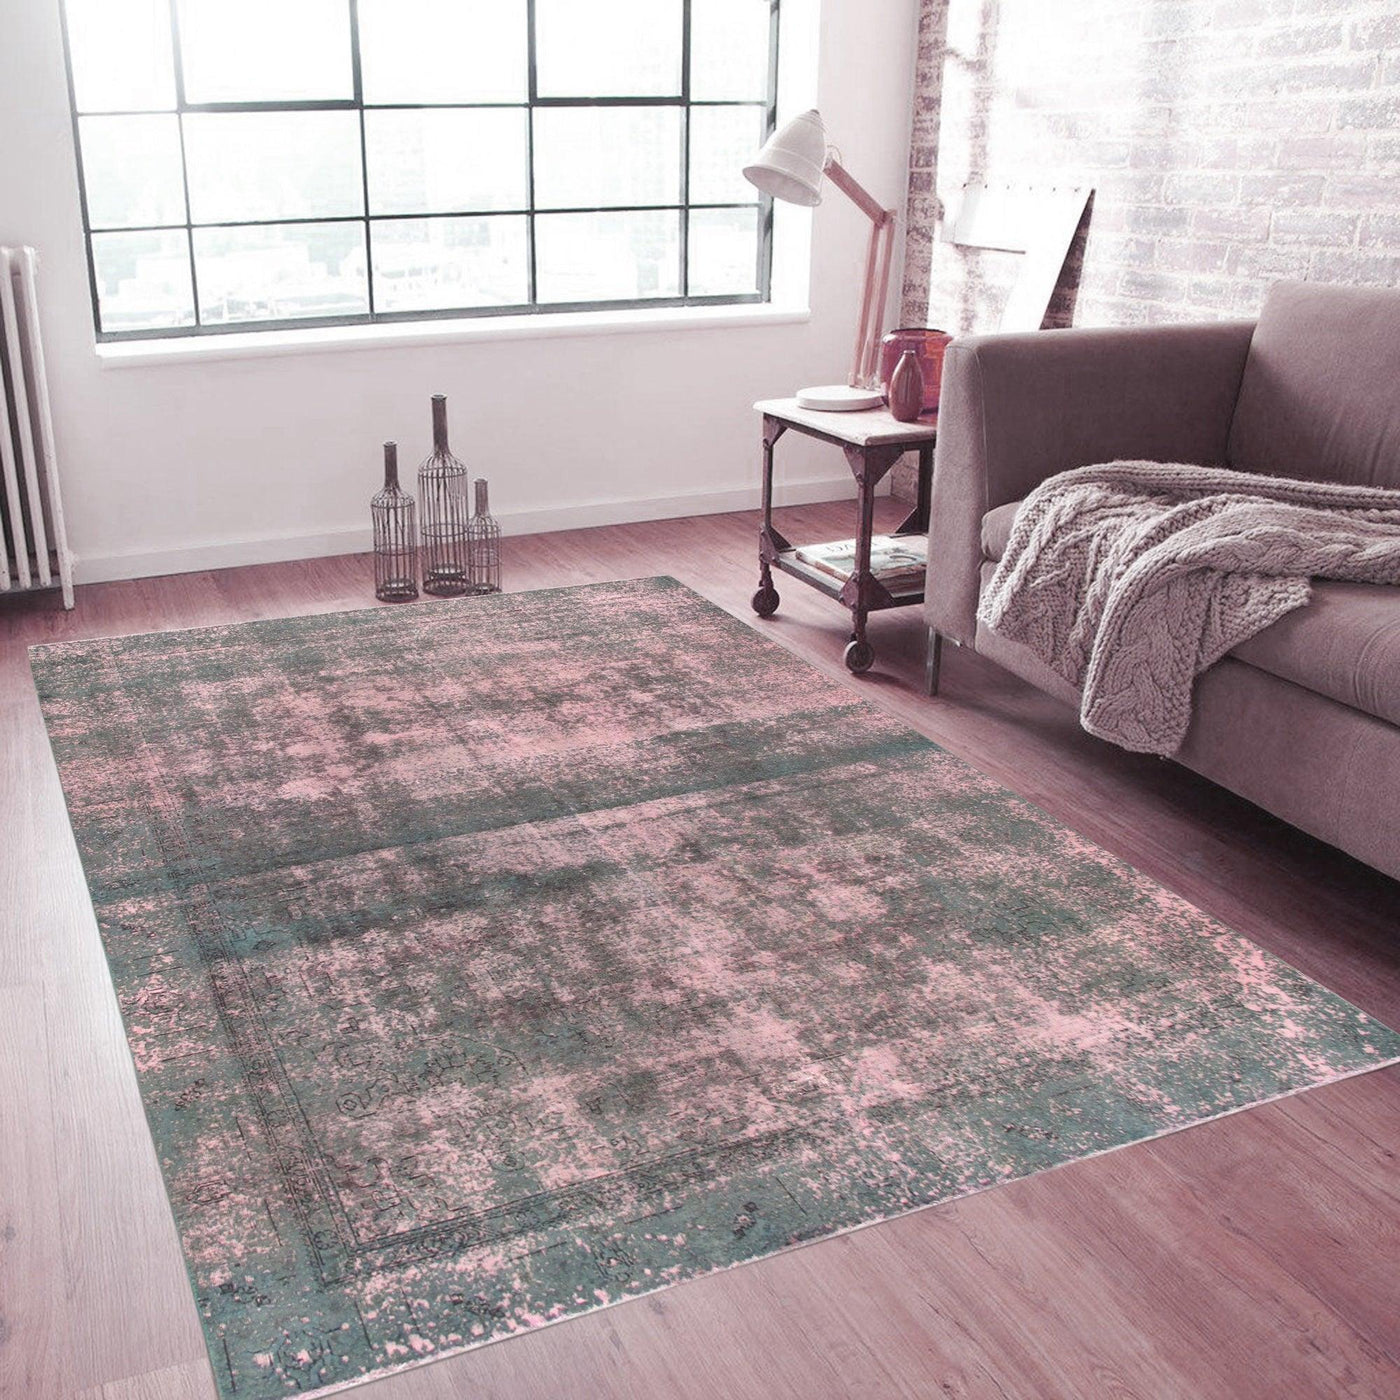 Canvello Overdyed Wool Pink And Green Rug - 8'10" X 11'6"